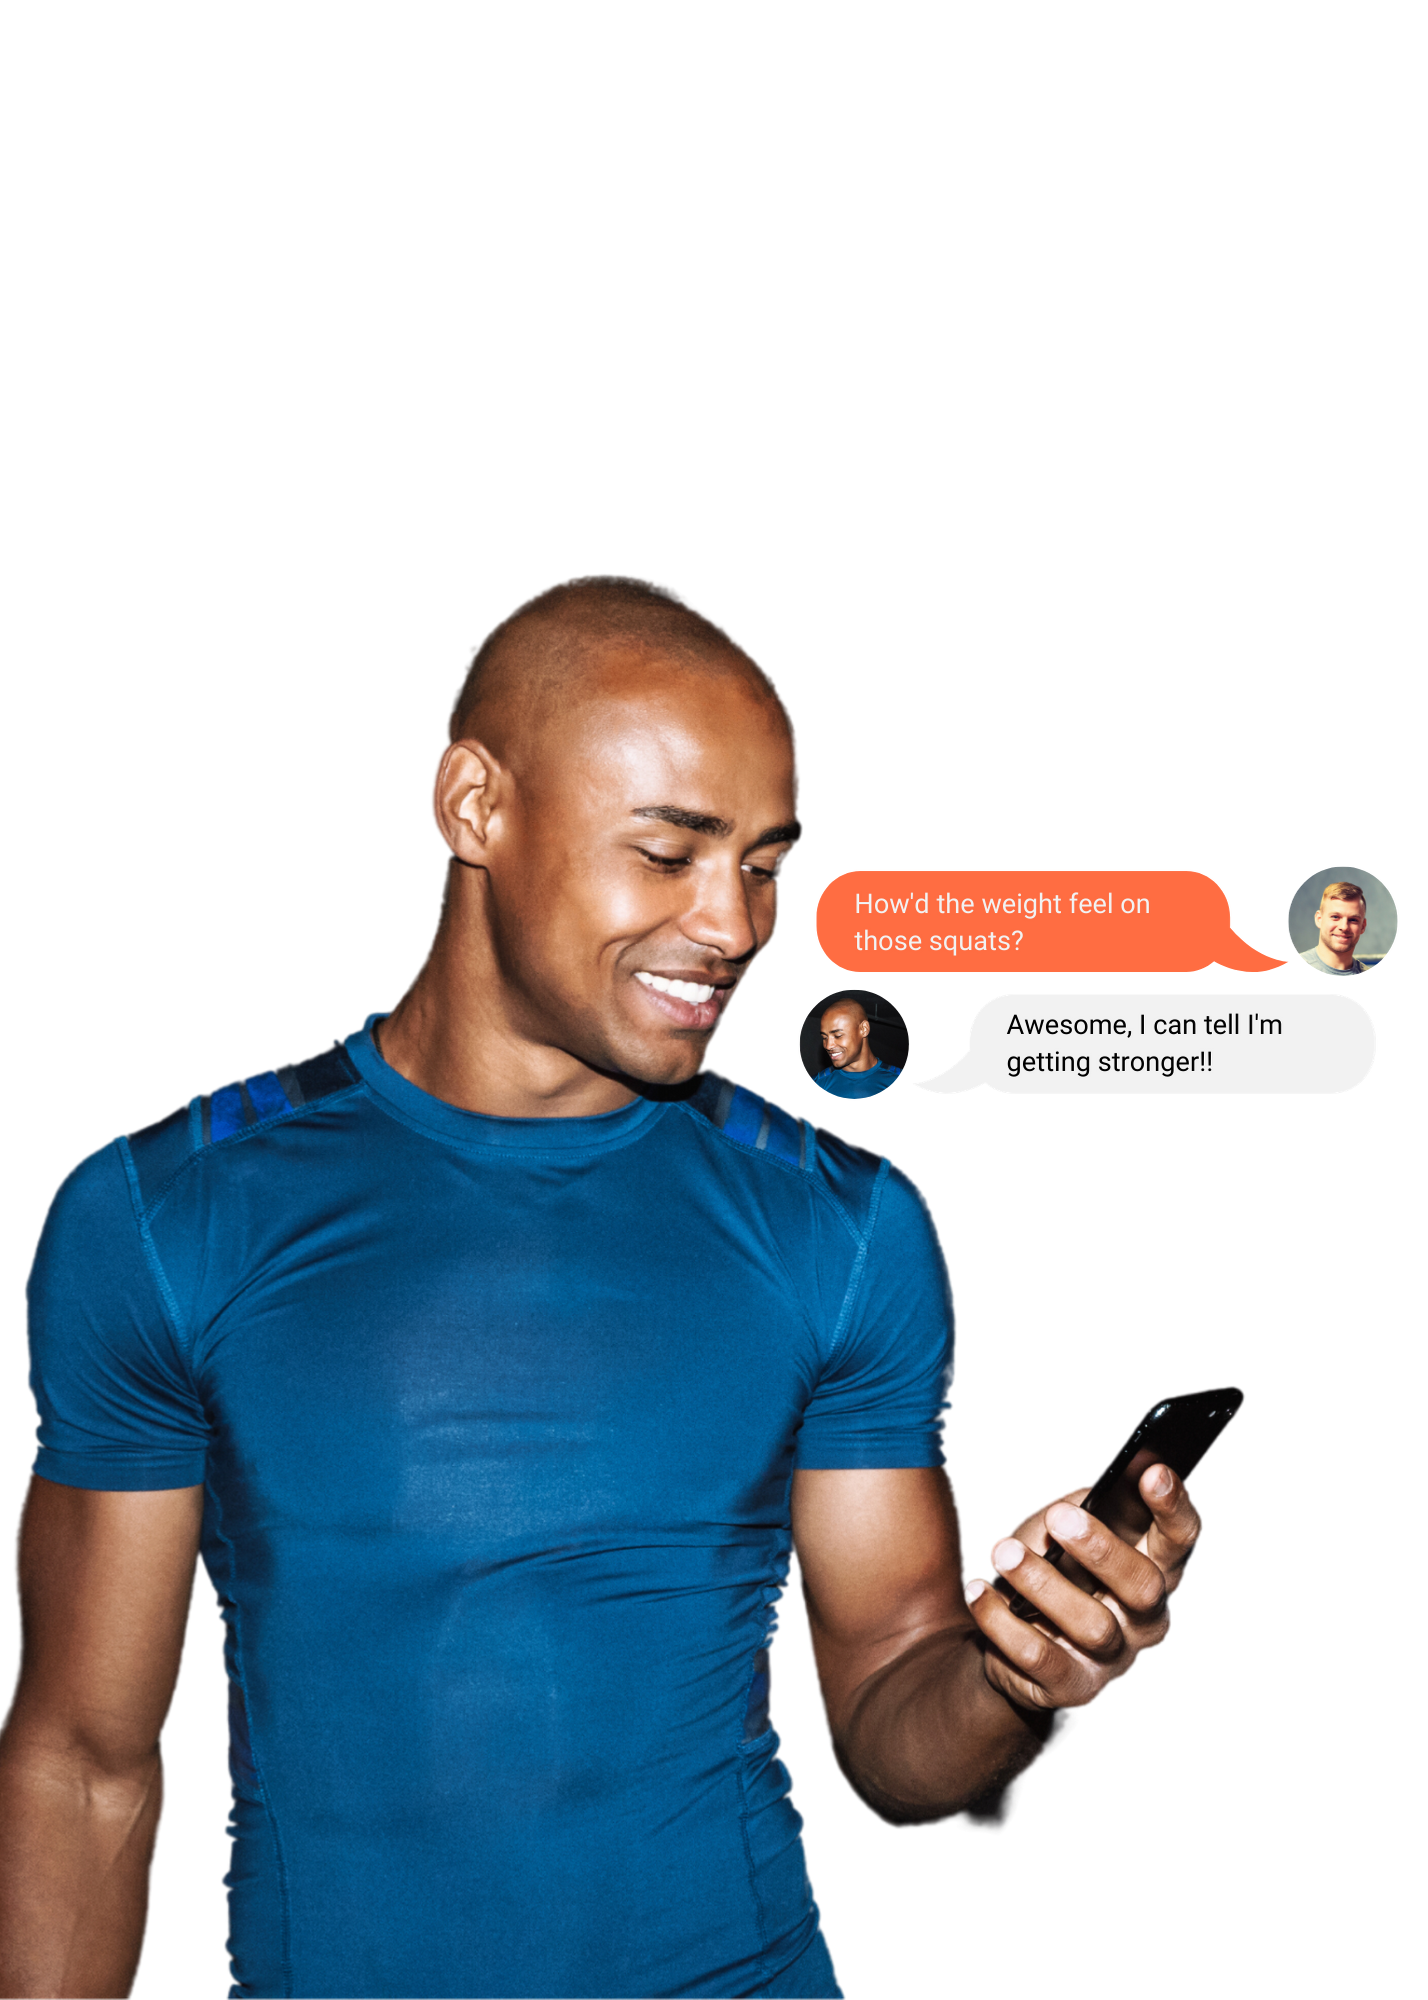 Chat daily with your remote personal trainer